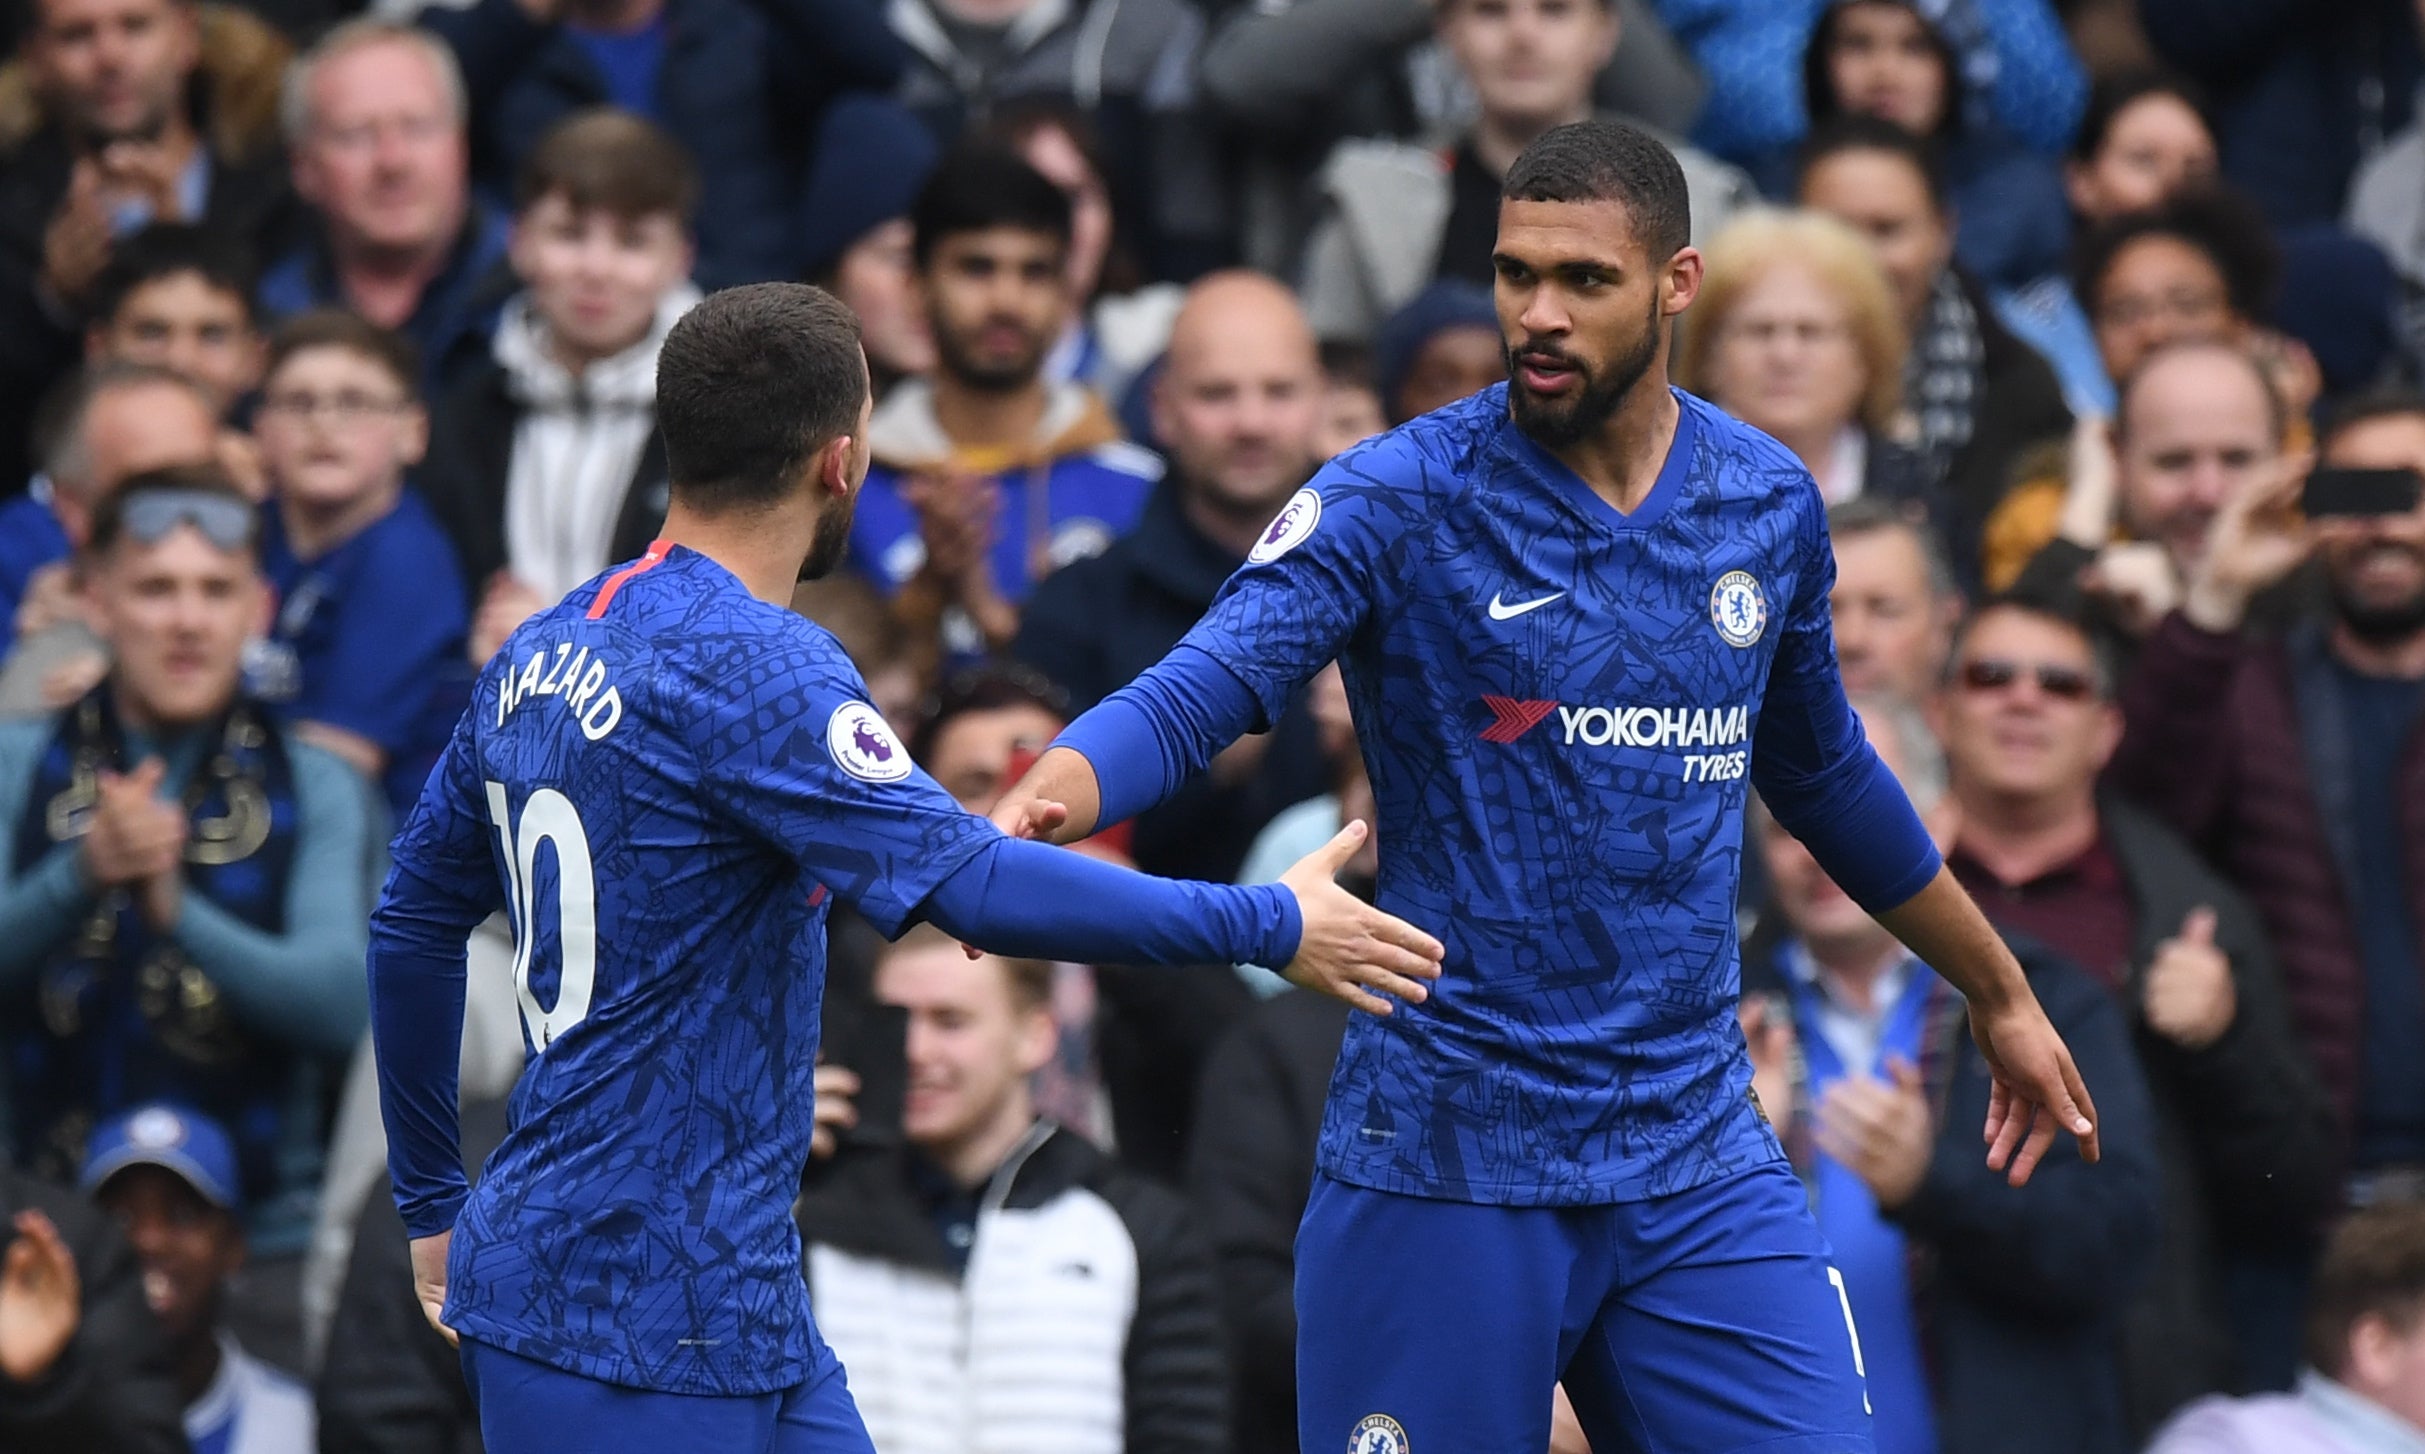 Loftus-Cheek is also set to commit his future